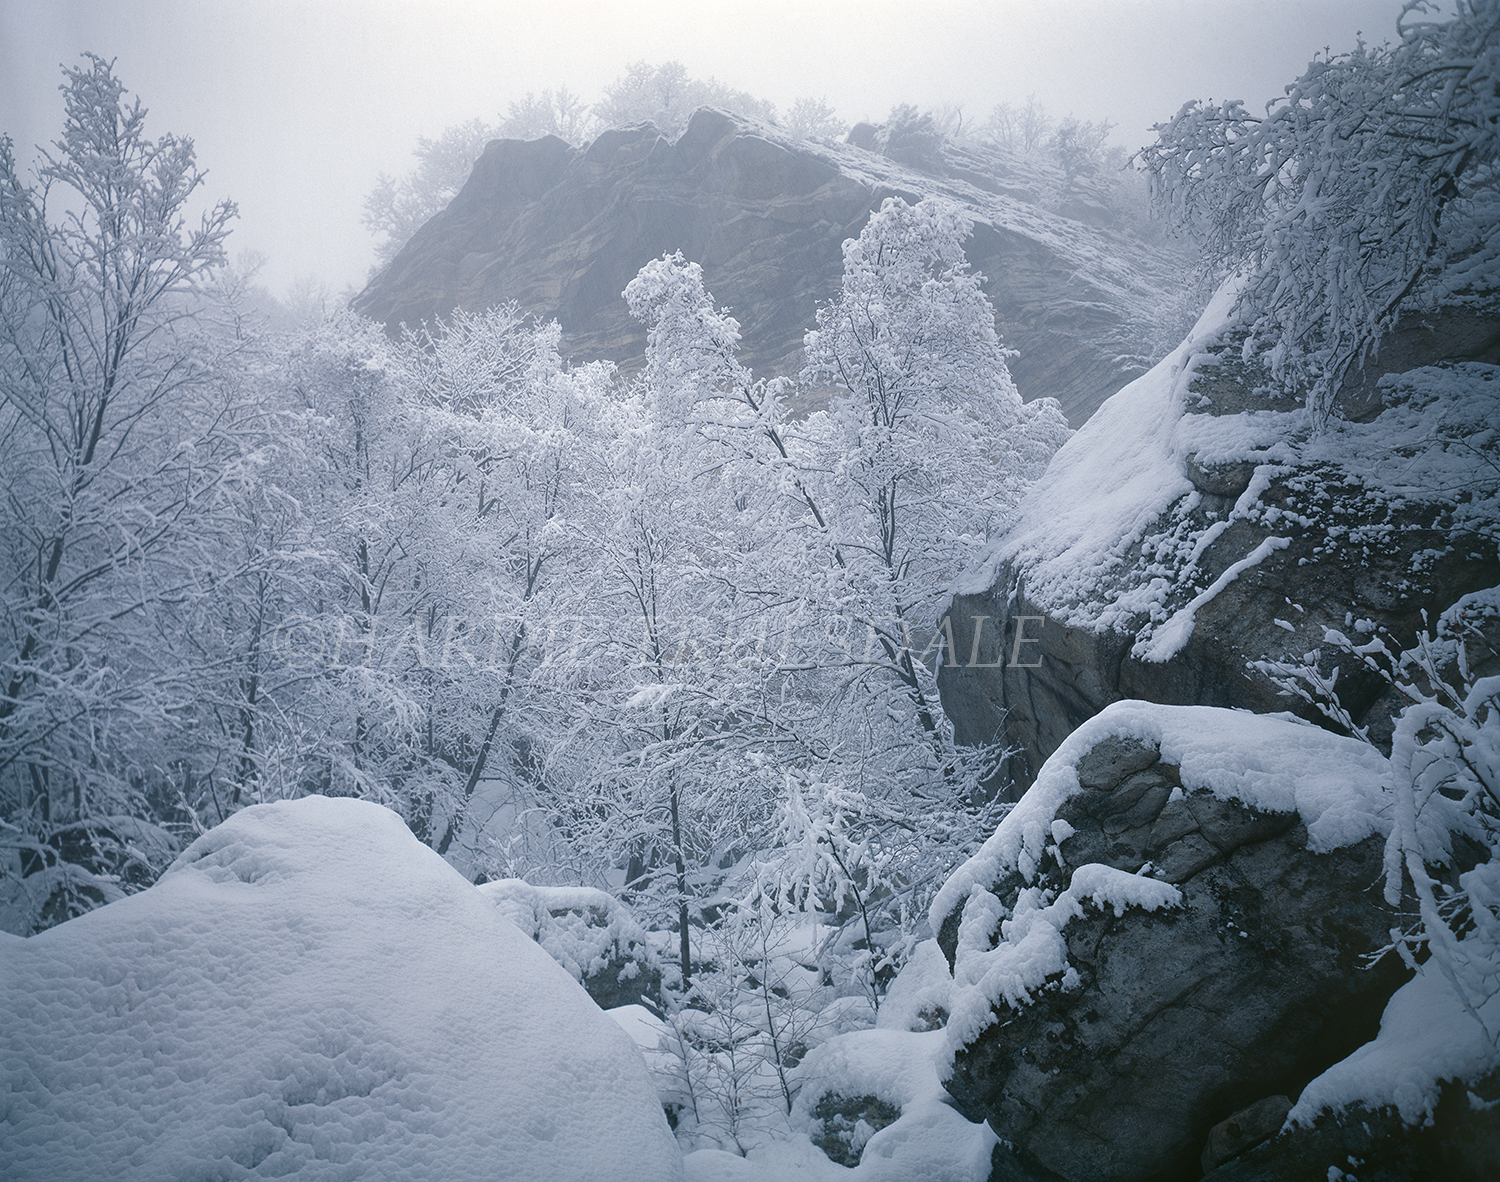  Gks#018 "Blizzard, Yellow Wall, Mohonk Preserve" 